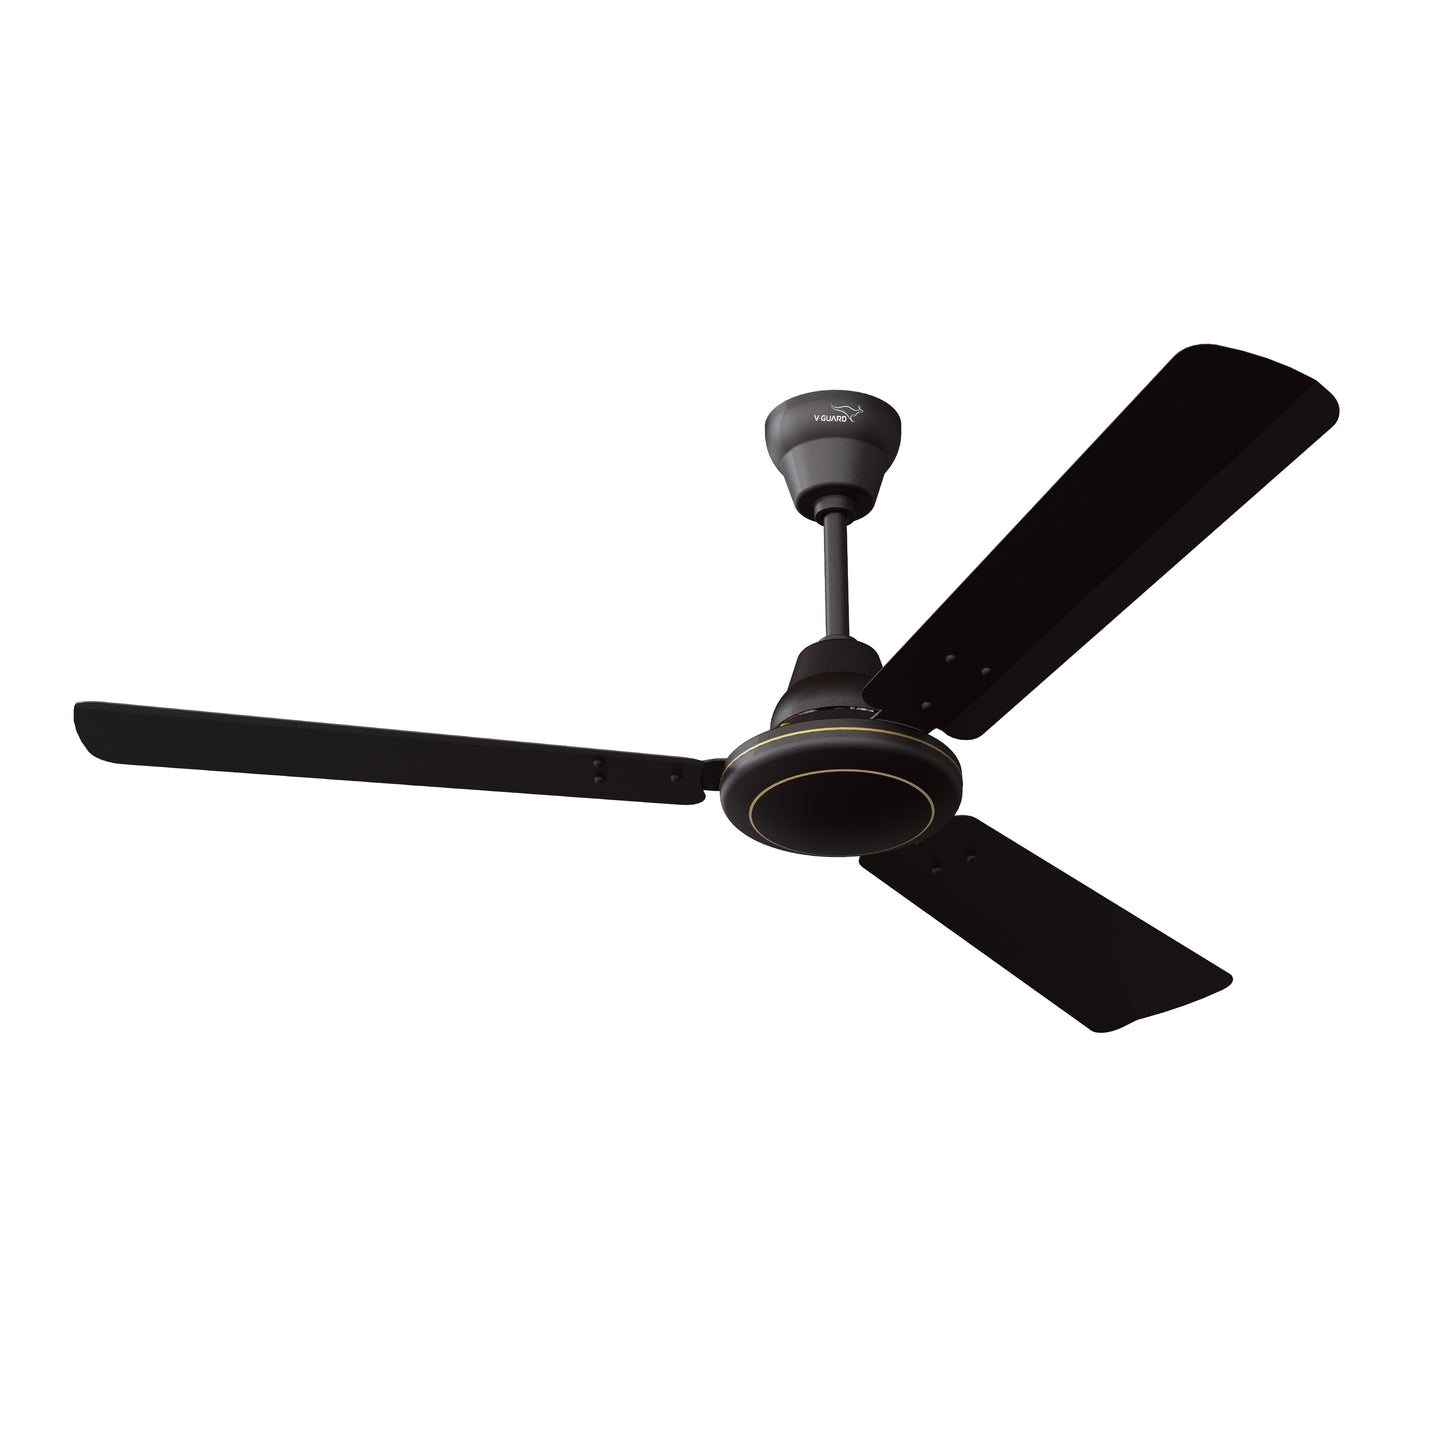 Ecowind Neo BLDC Motor Ceiling Fan, 1.2 m, Matte Brown, 5 Star Rated